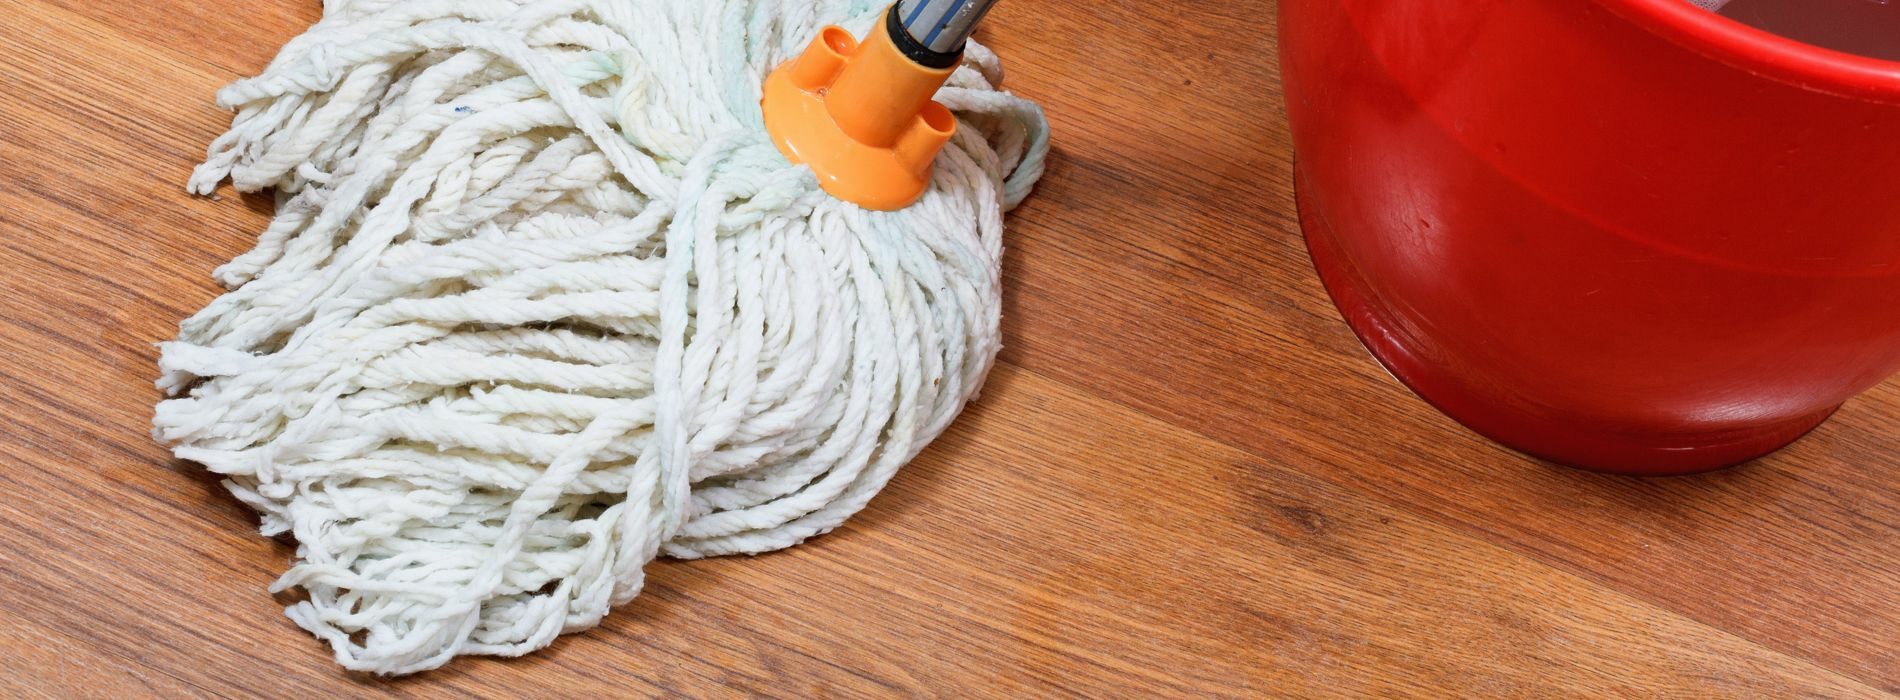 A mop and a red cup on a wooden floor.